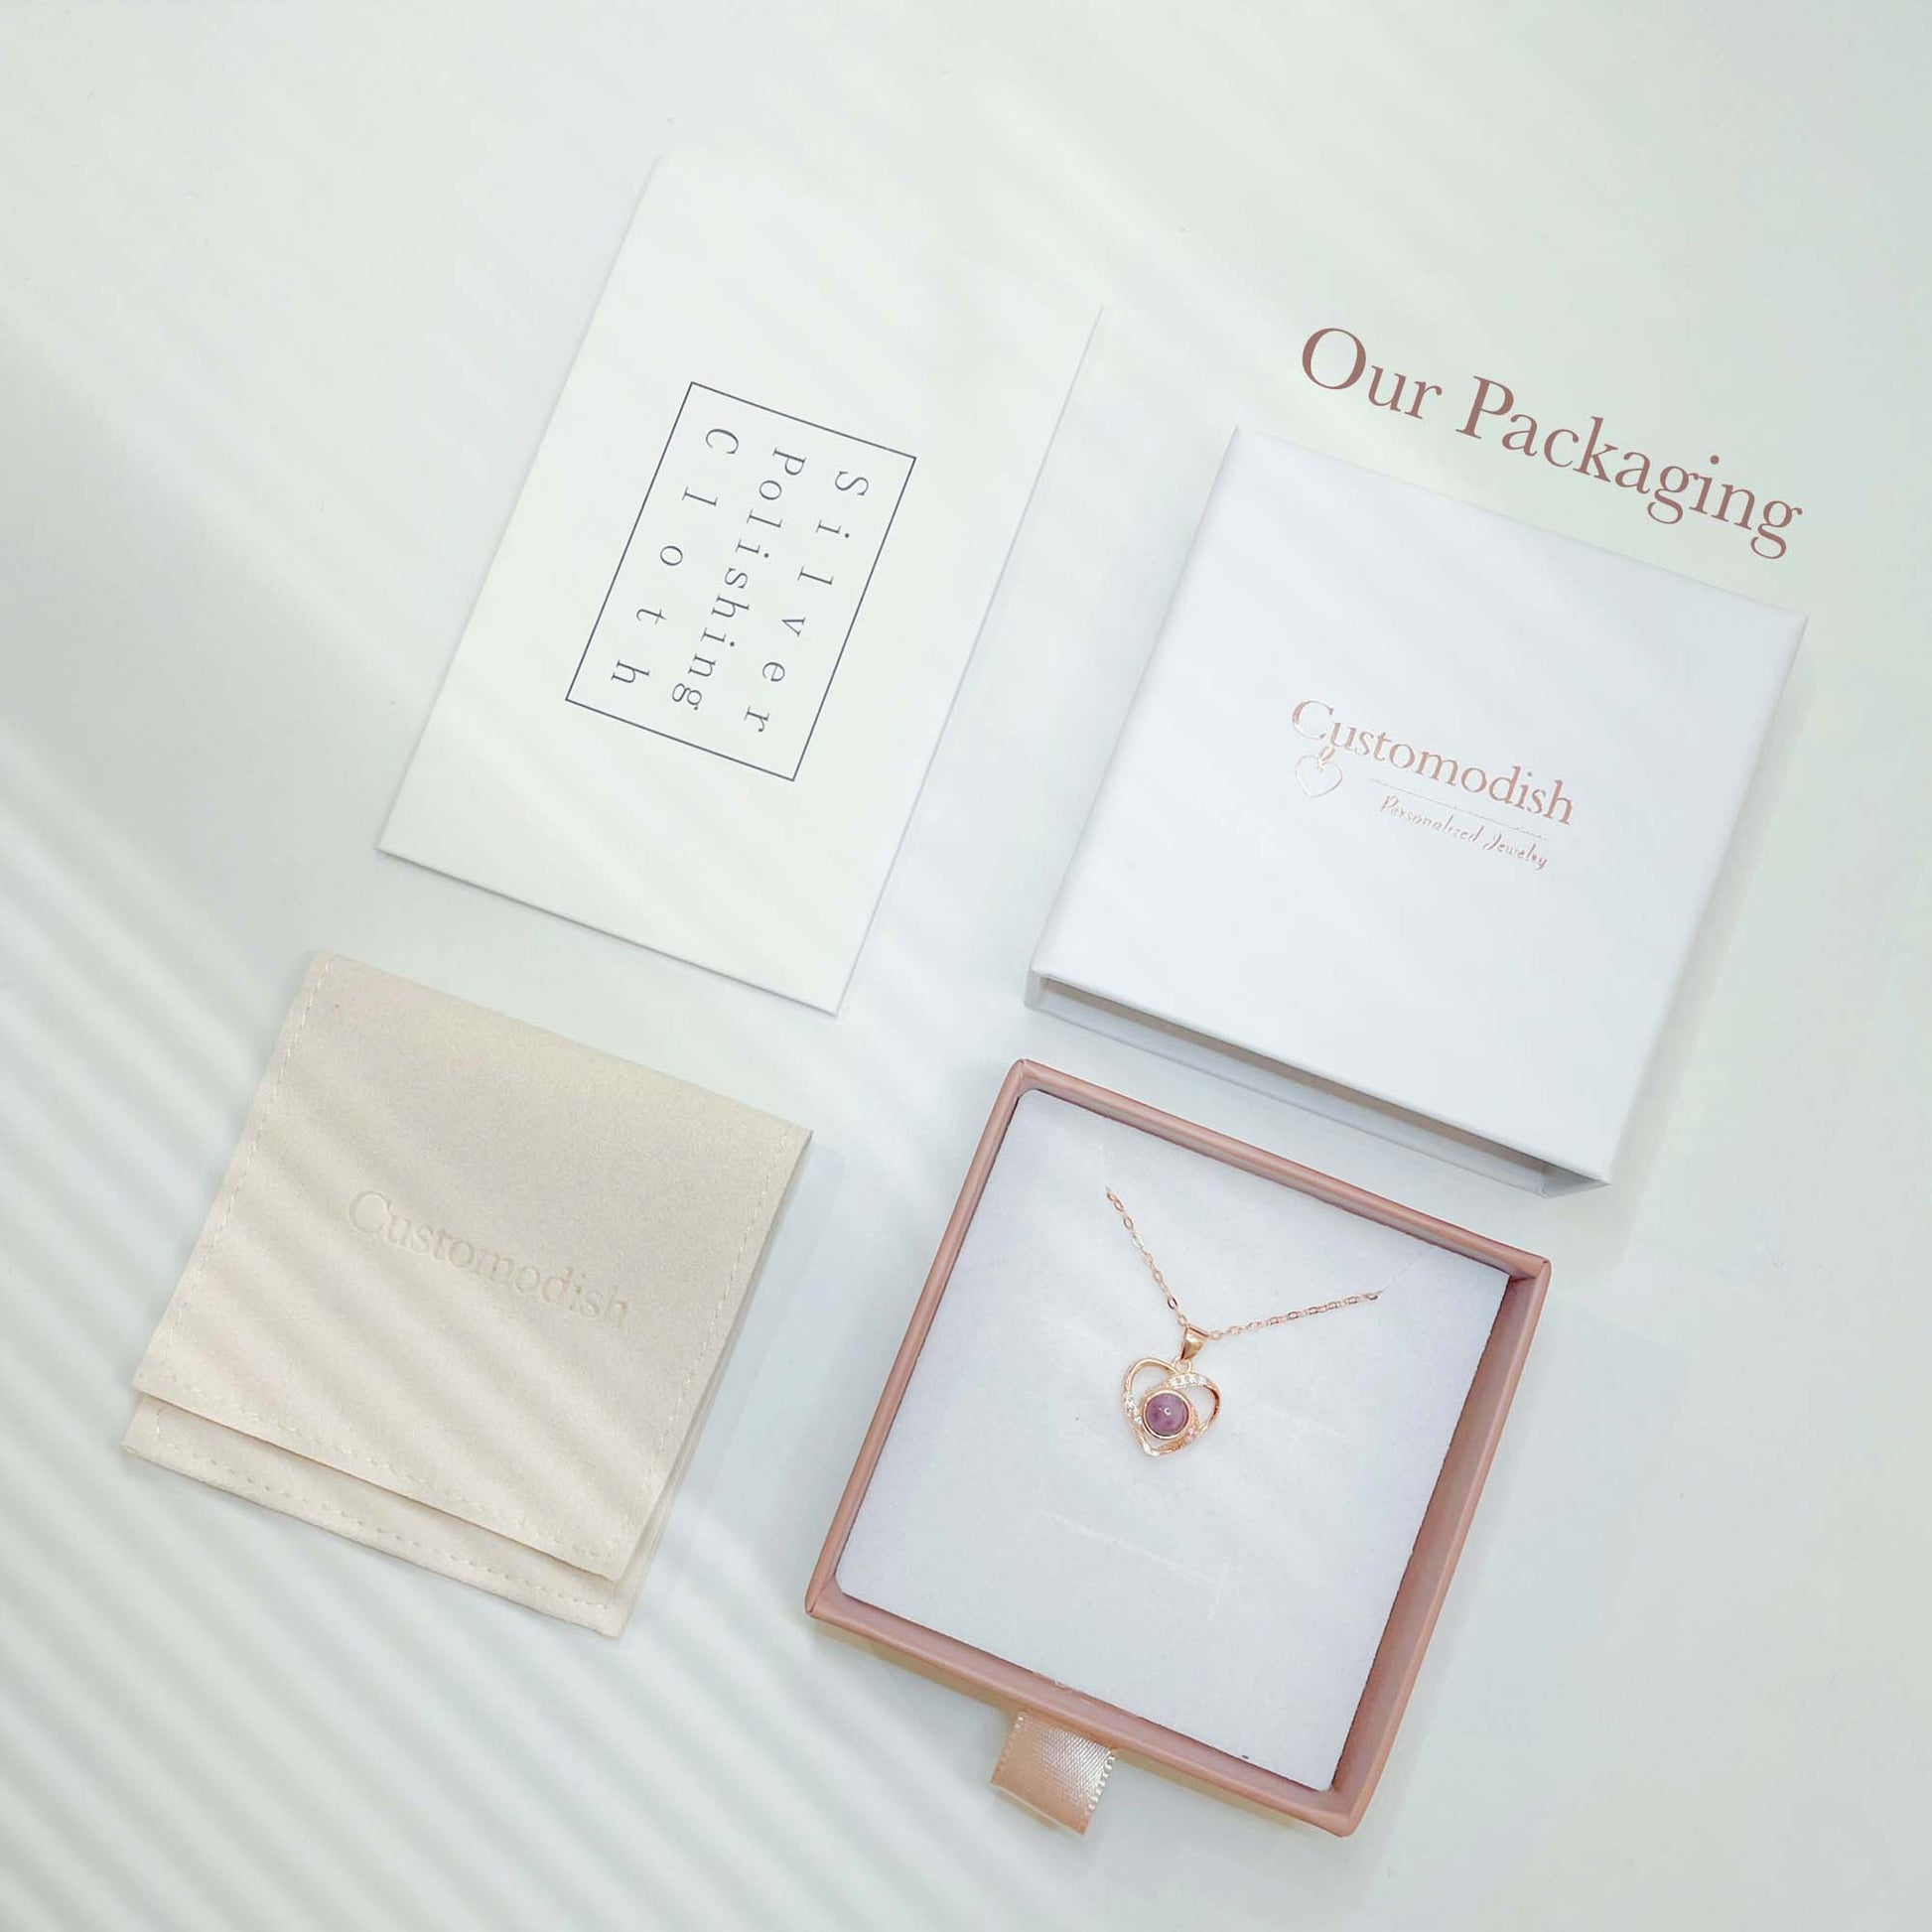 Your projection necklace will come with a silver polishing cloth